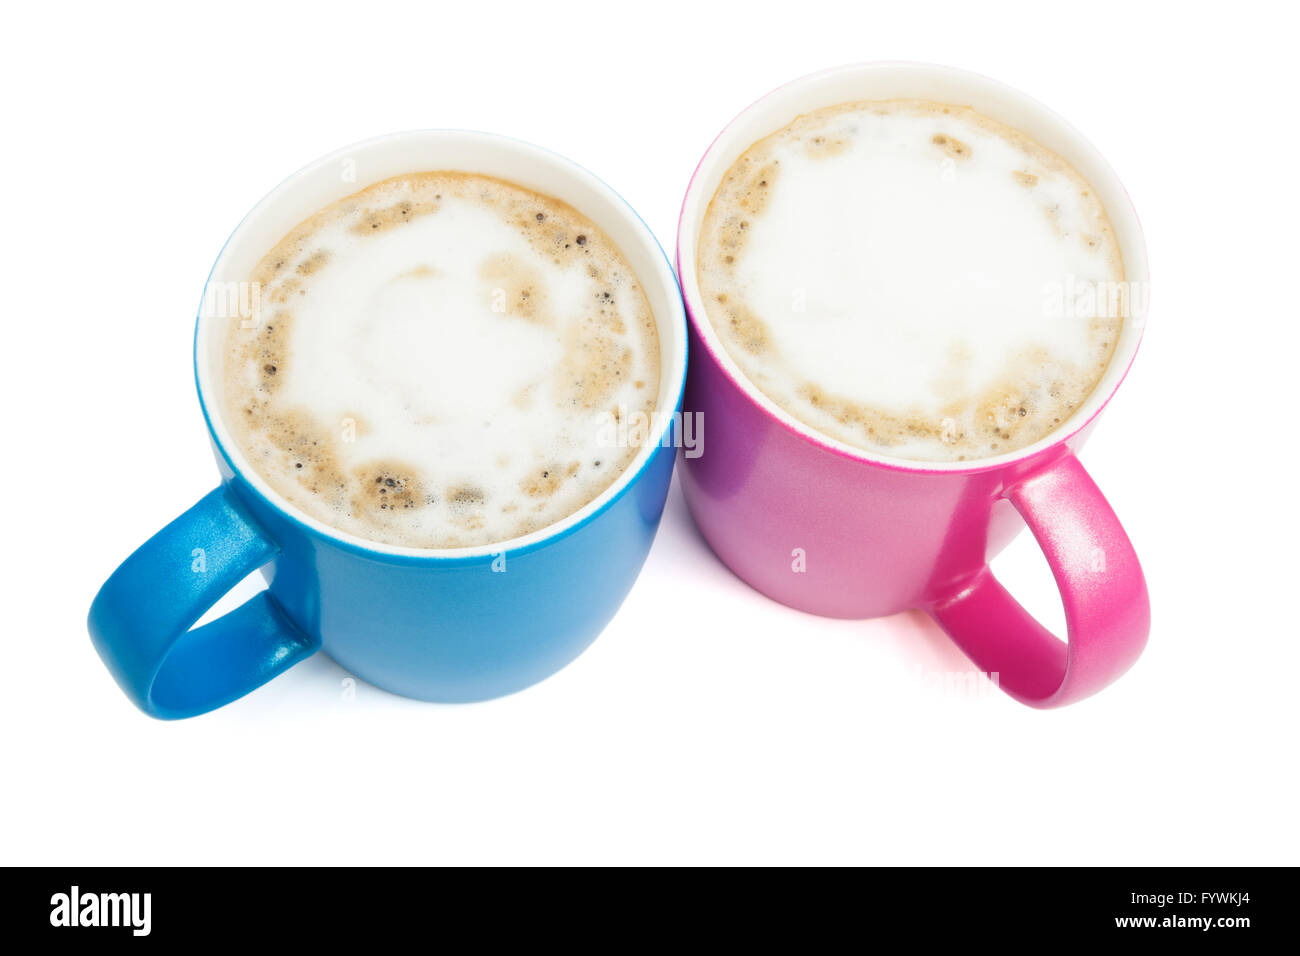 cups of cappuccino on white background Stock Photo